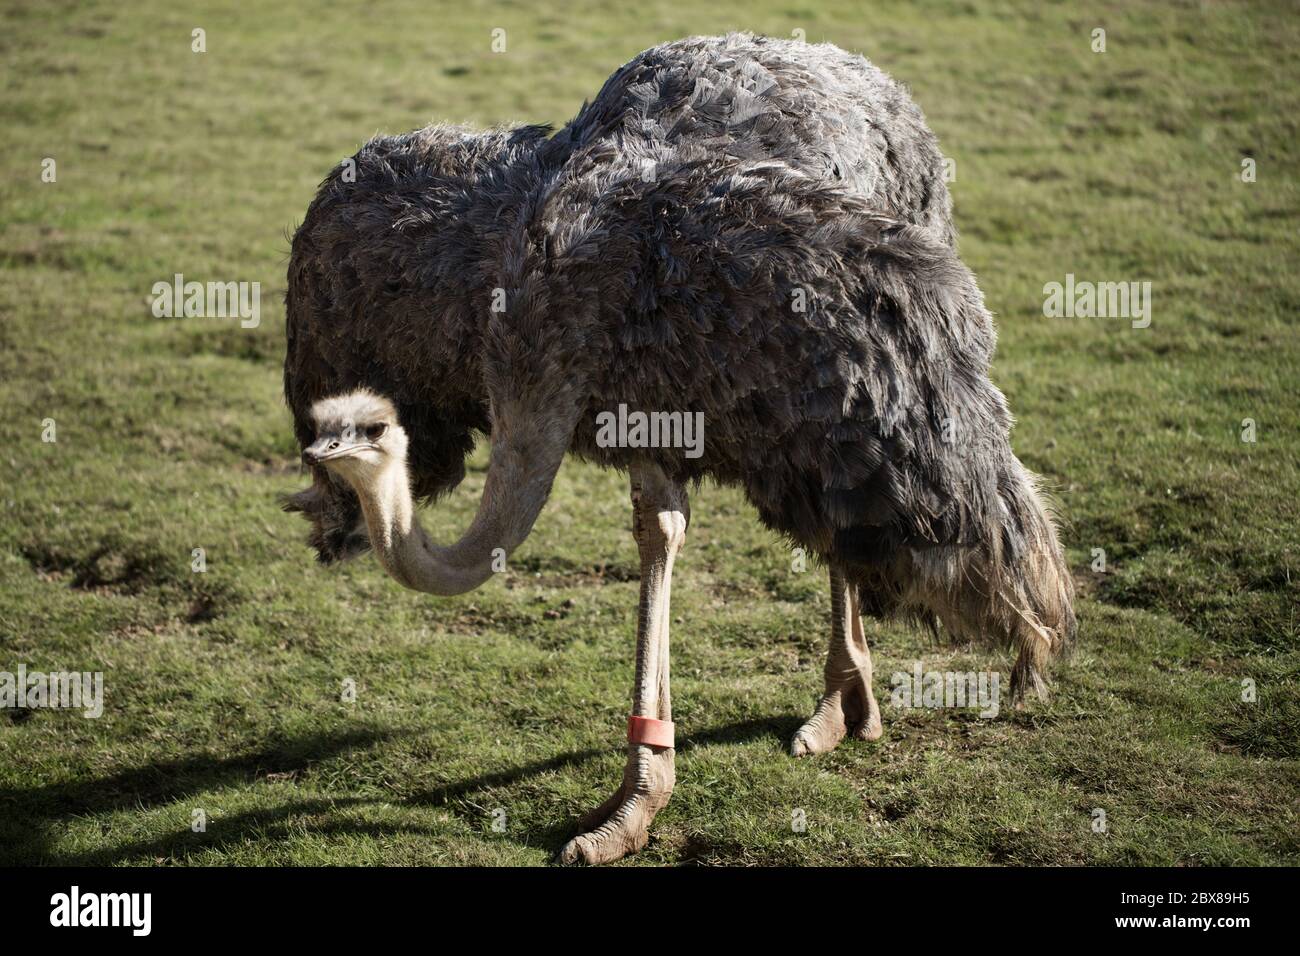 Female Ostrich (Struthio camelus) displaying on grass Stock Photo